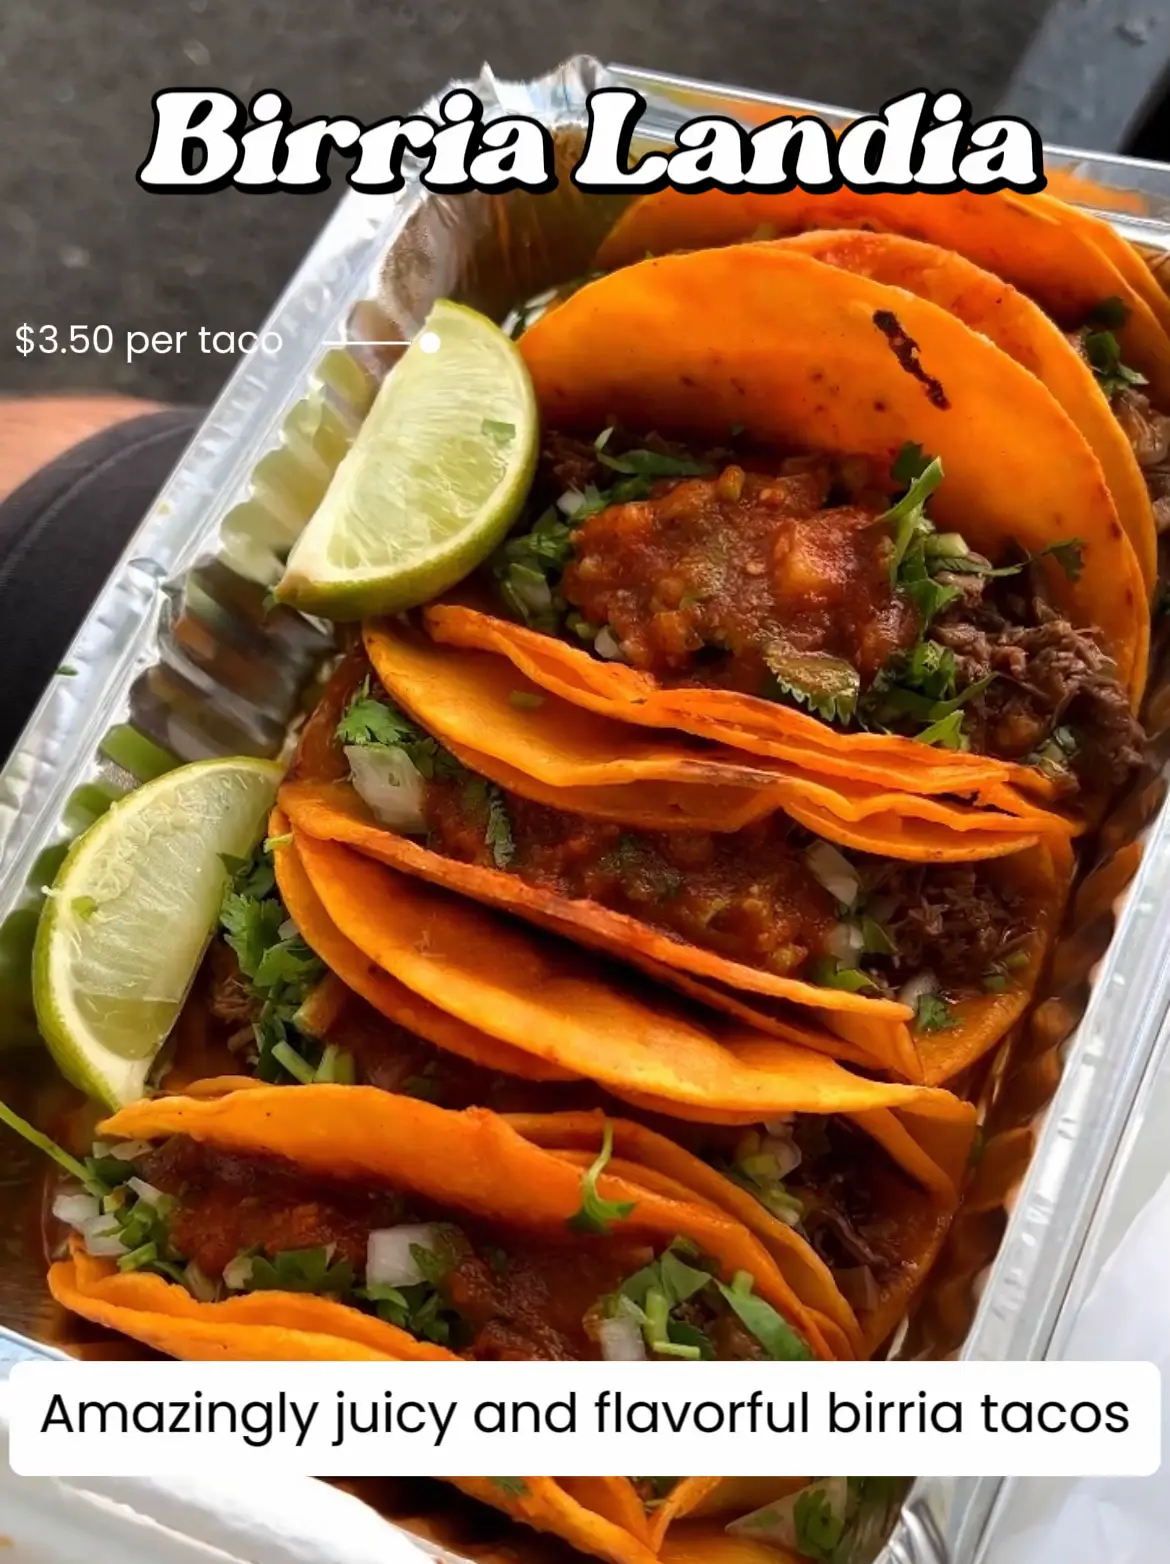  A container of tacos with a price of $3.50.